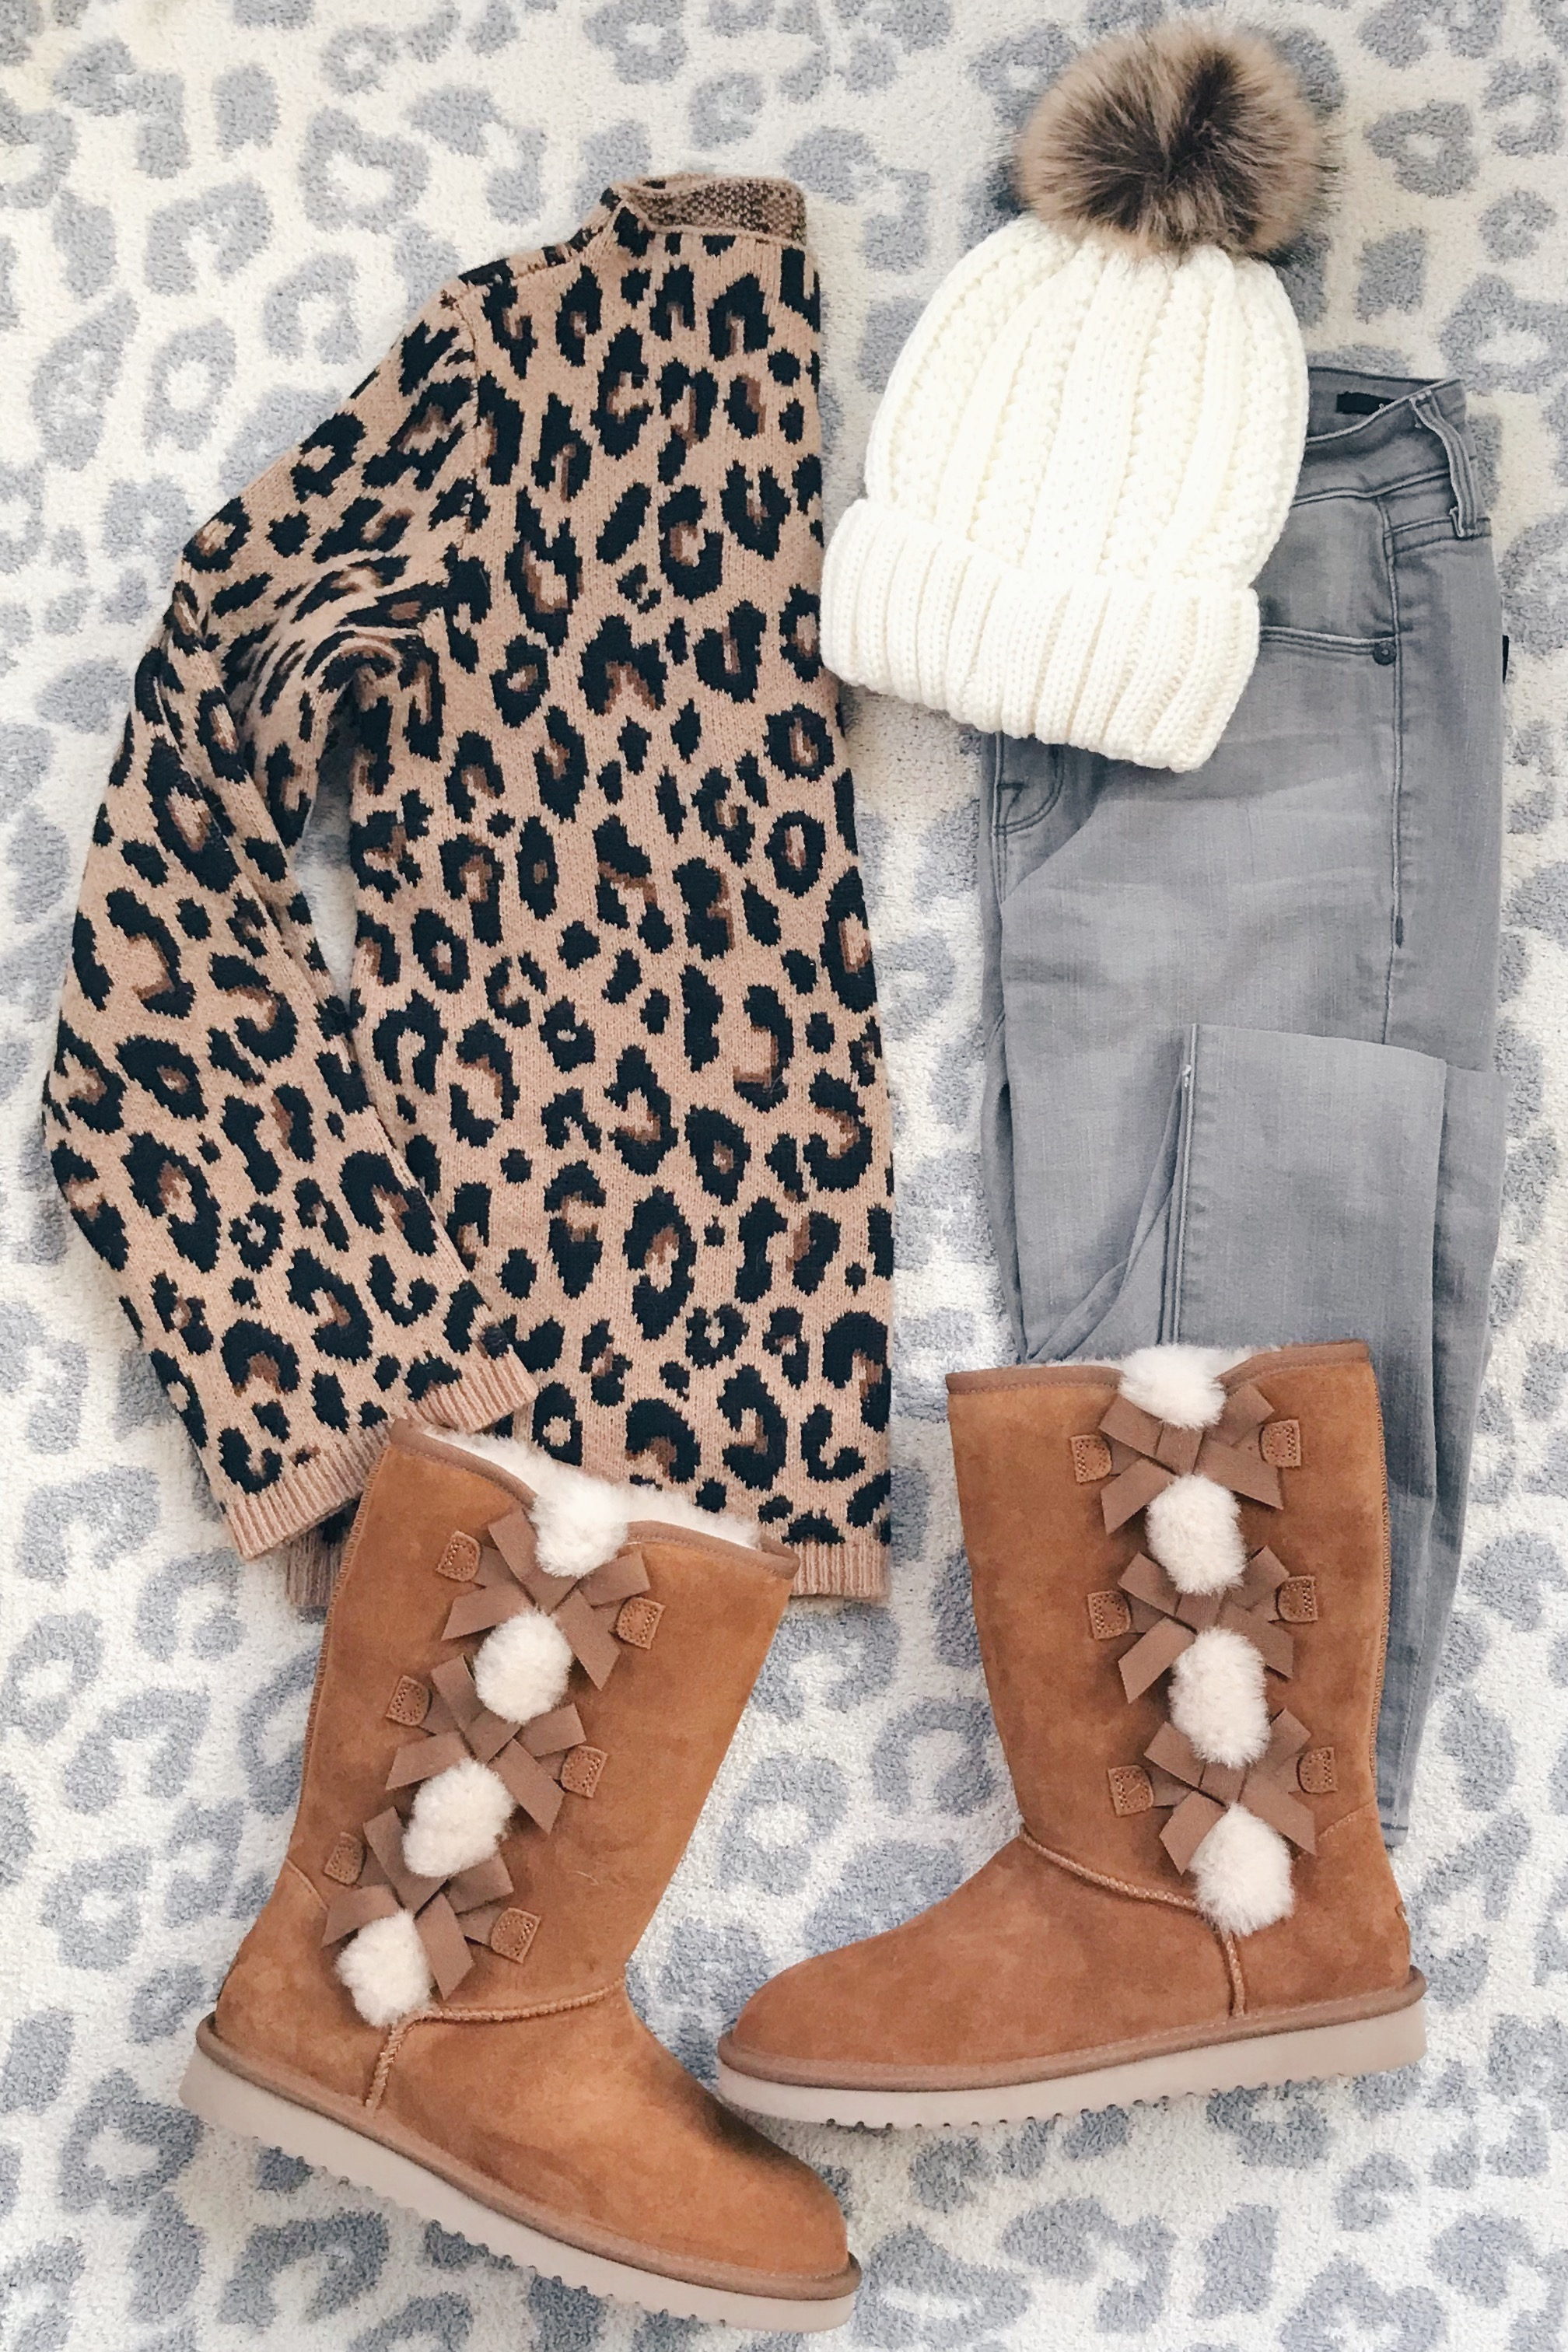  women's boots with bows and a leopard sweater outfit on pinteresting plans blog